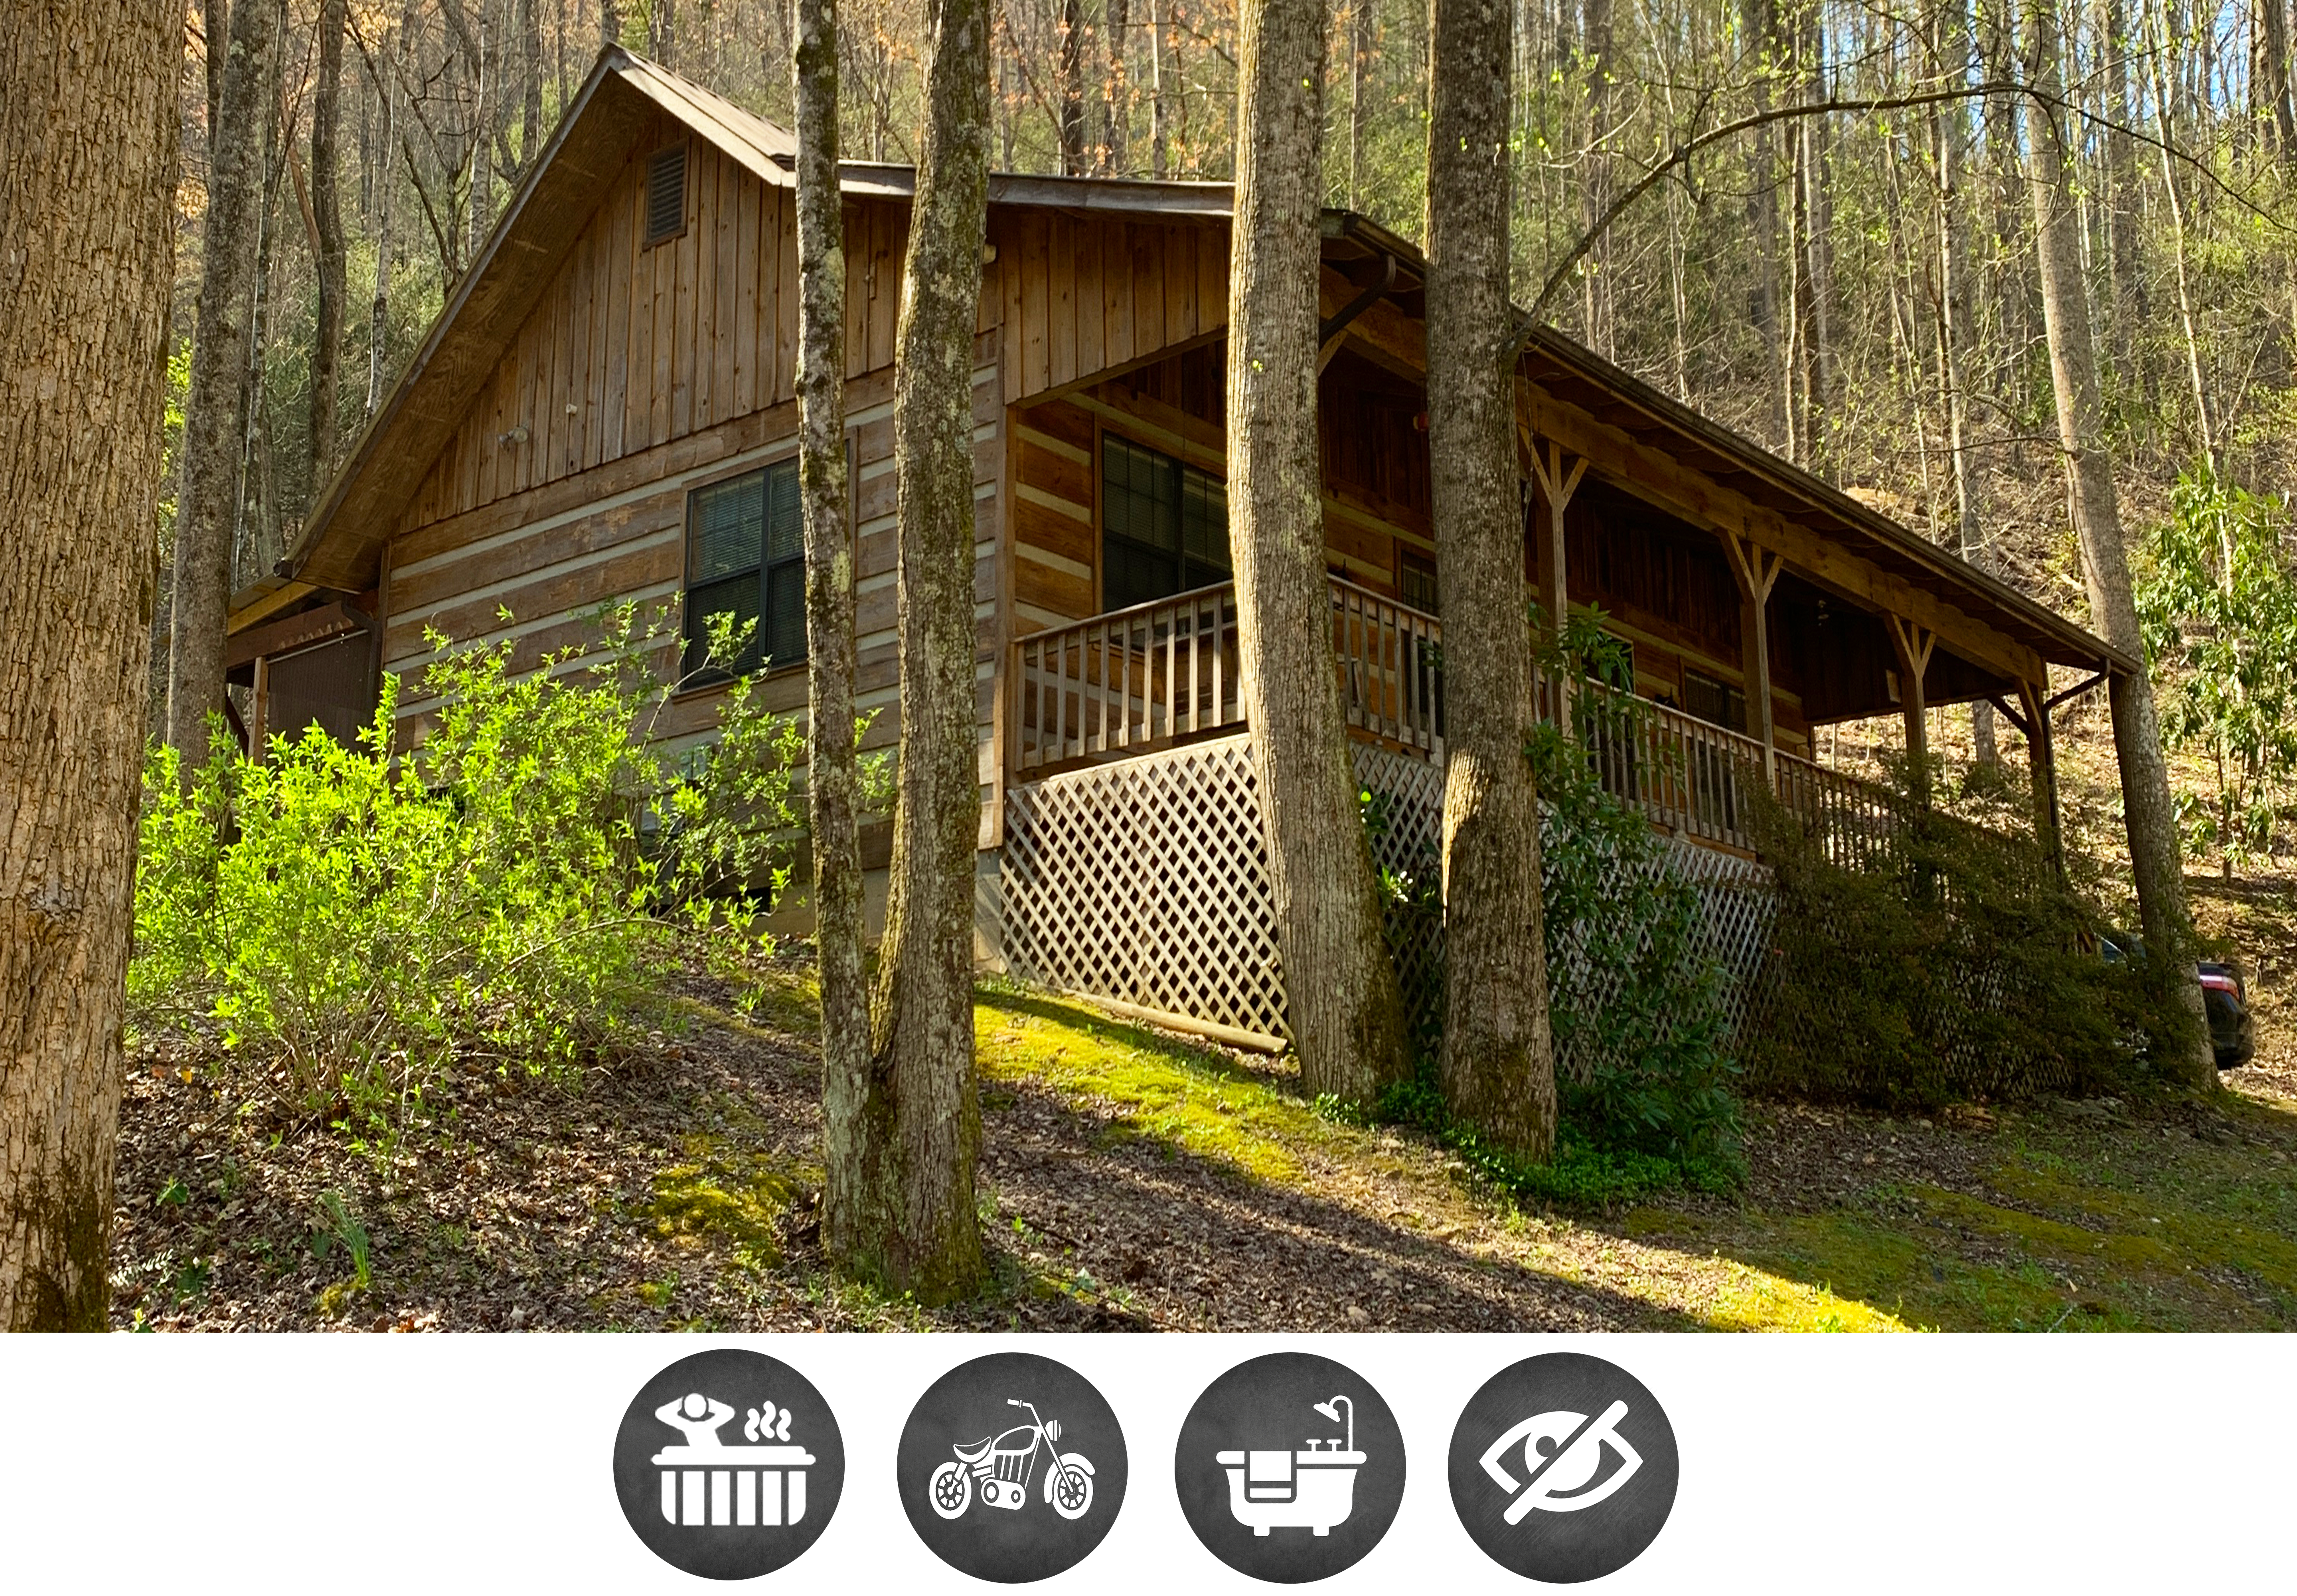 Little Mountain Hideaway - Grill / Hot tub / Secluded / Creek View